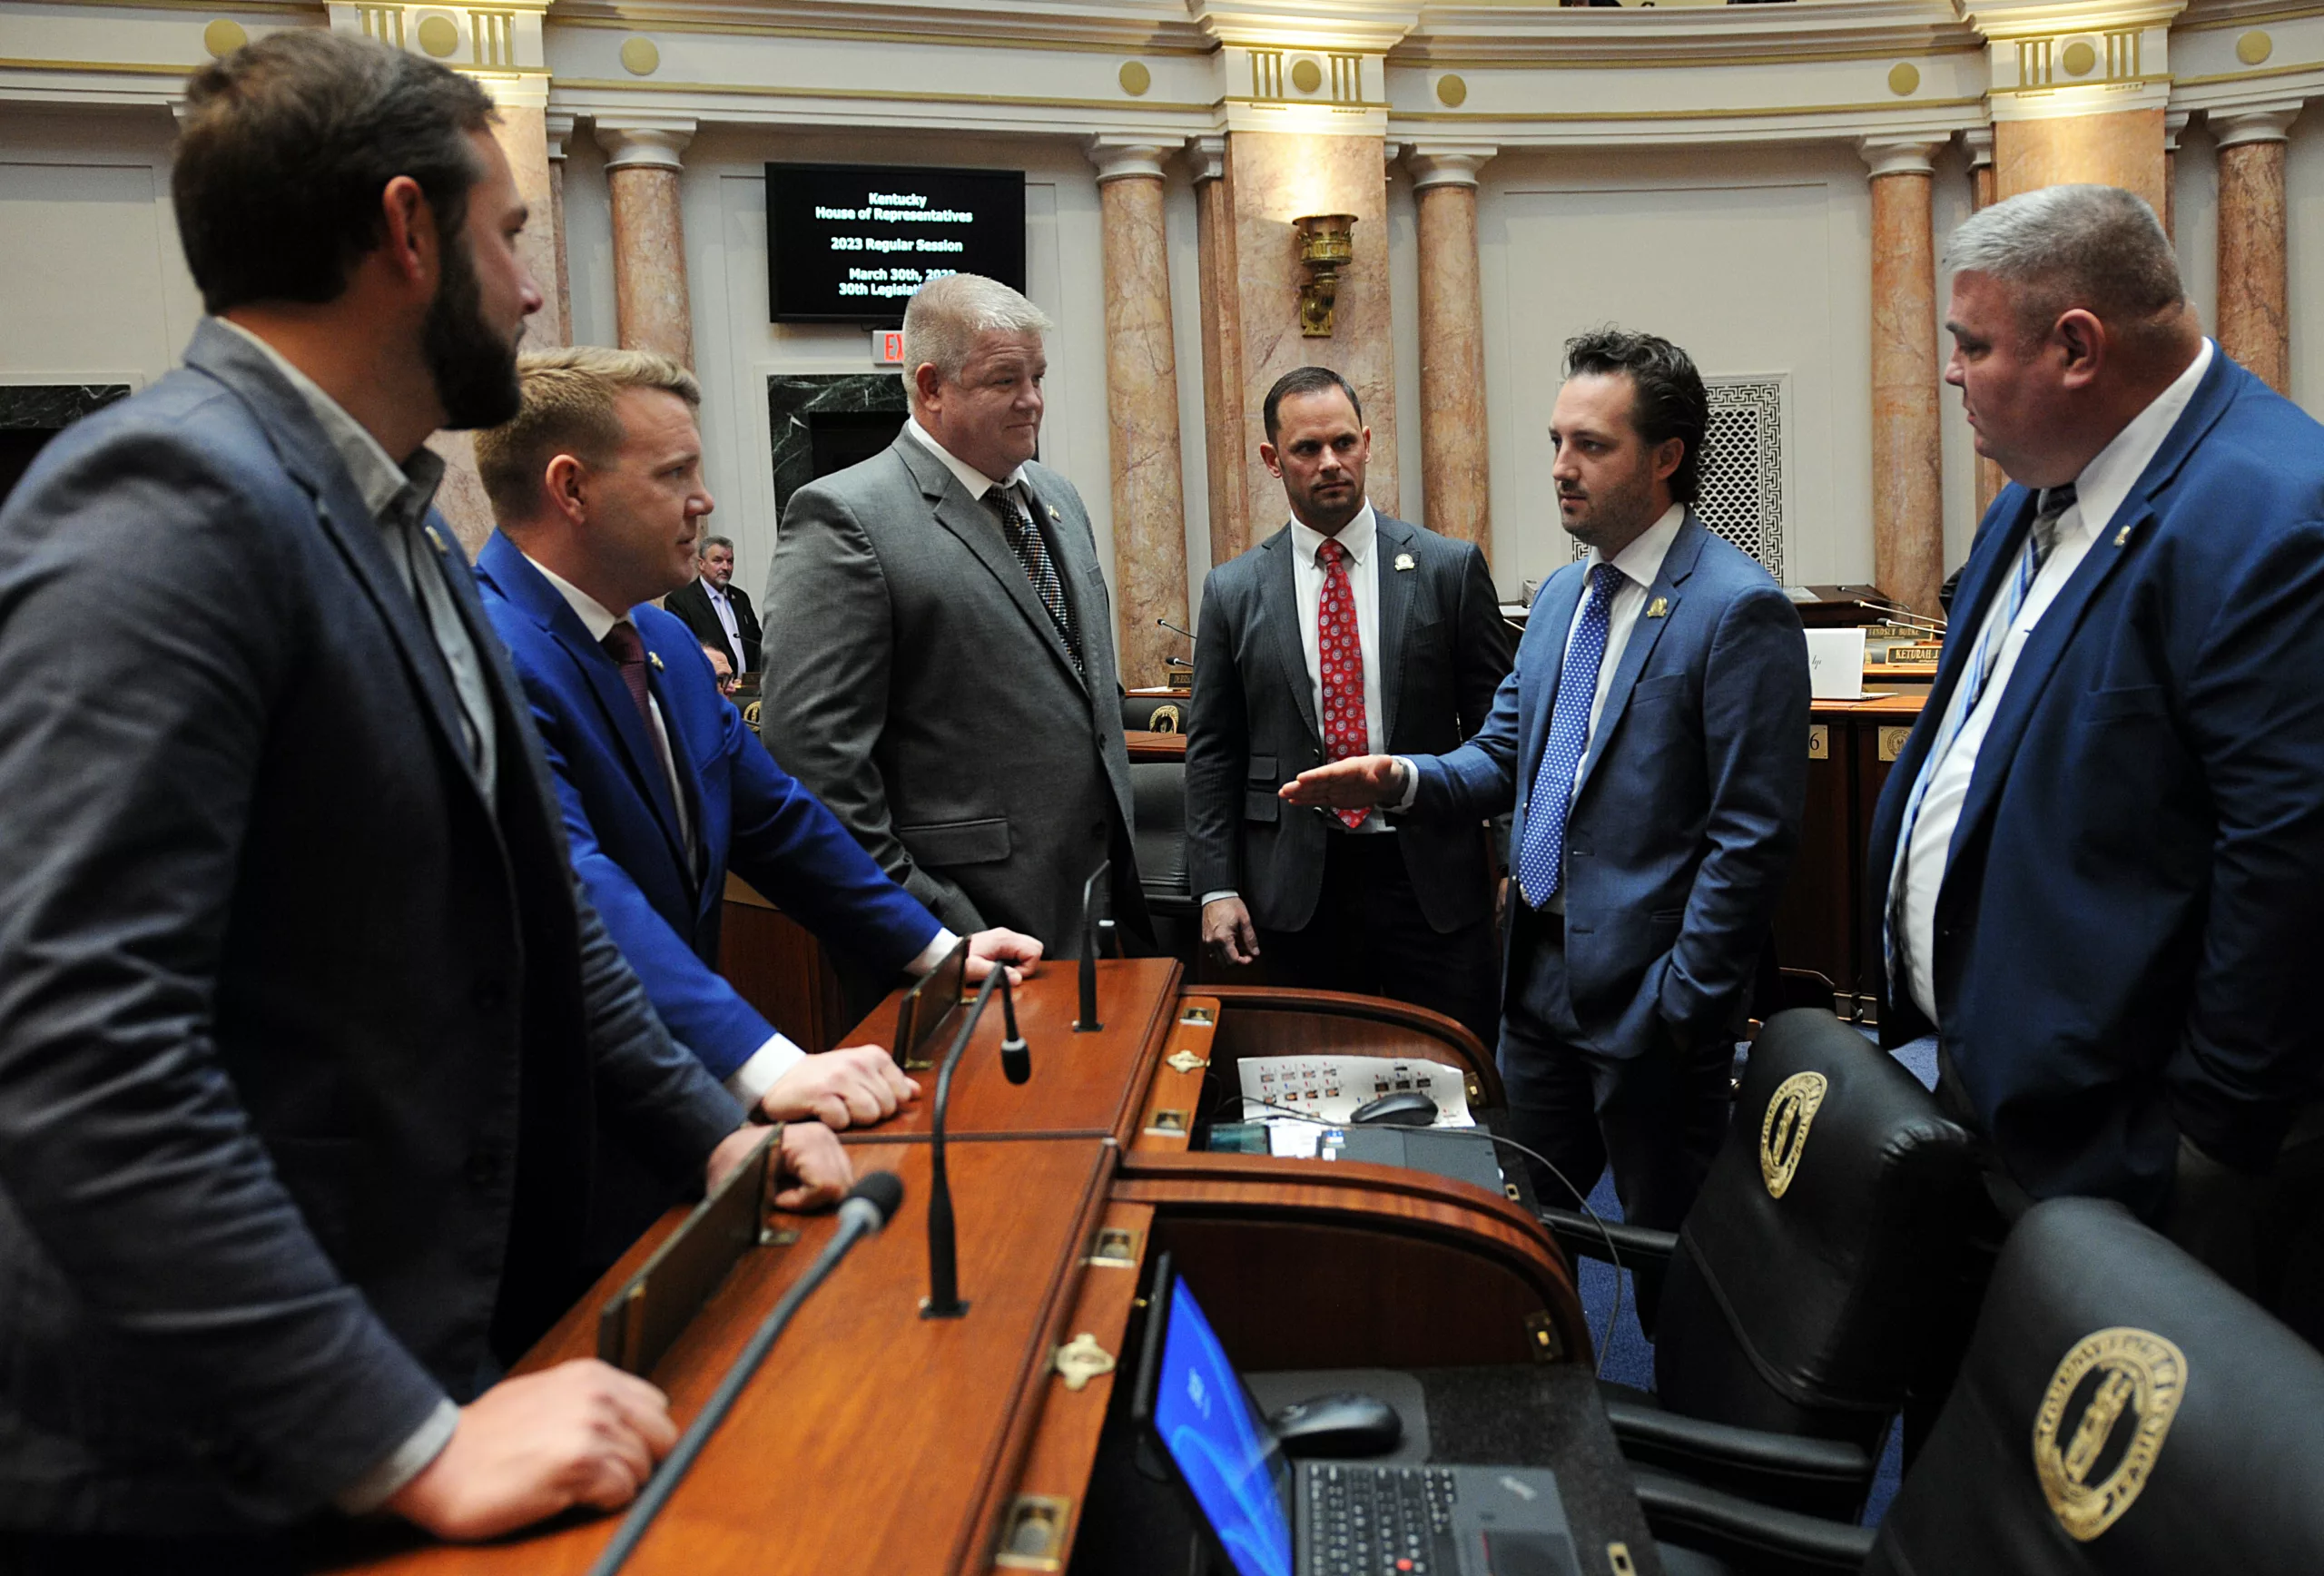 Influence Arms Race: Lobbying Spending Hits the Roof in Kentucky, Who's Buying the Power?